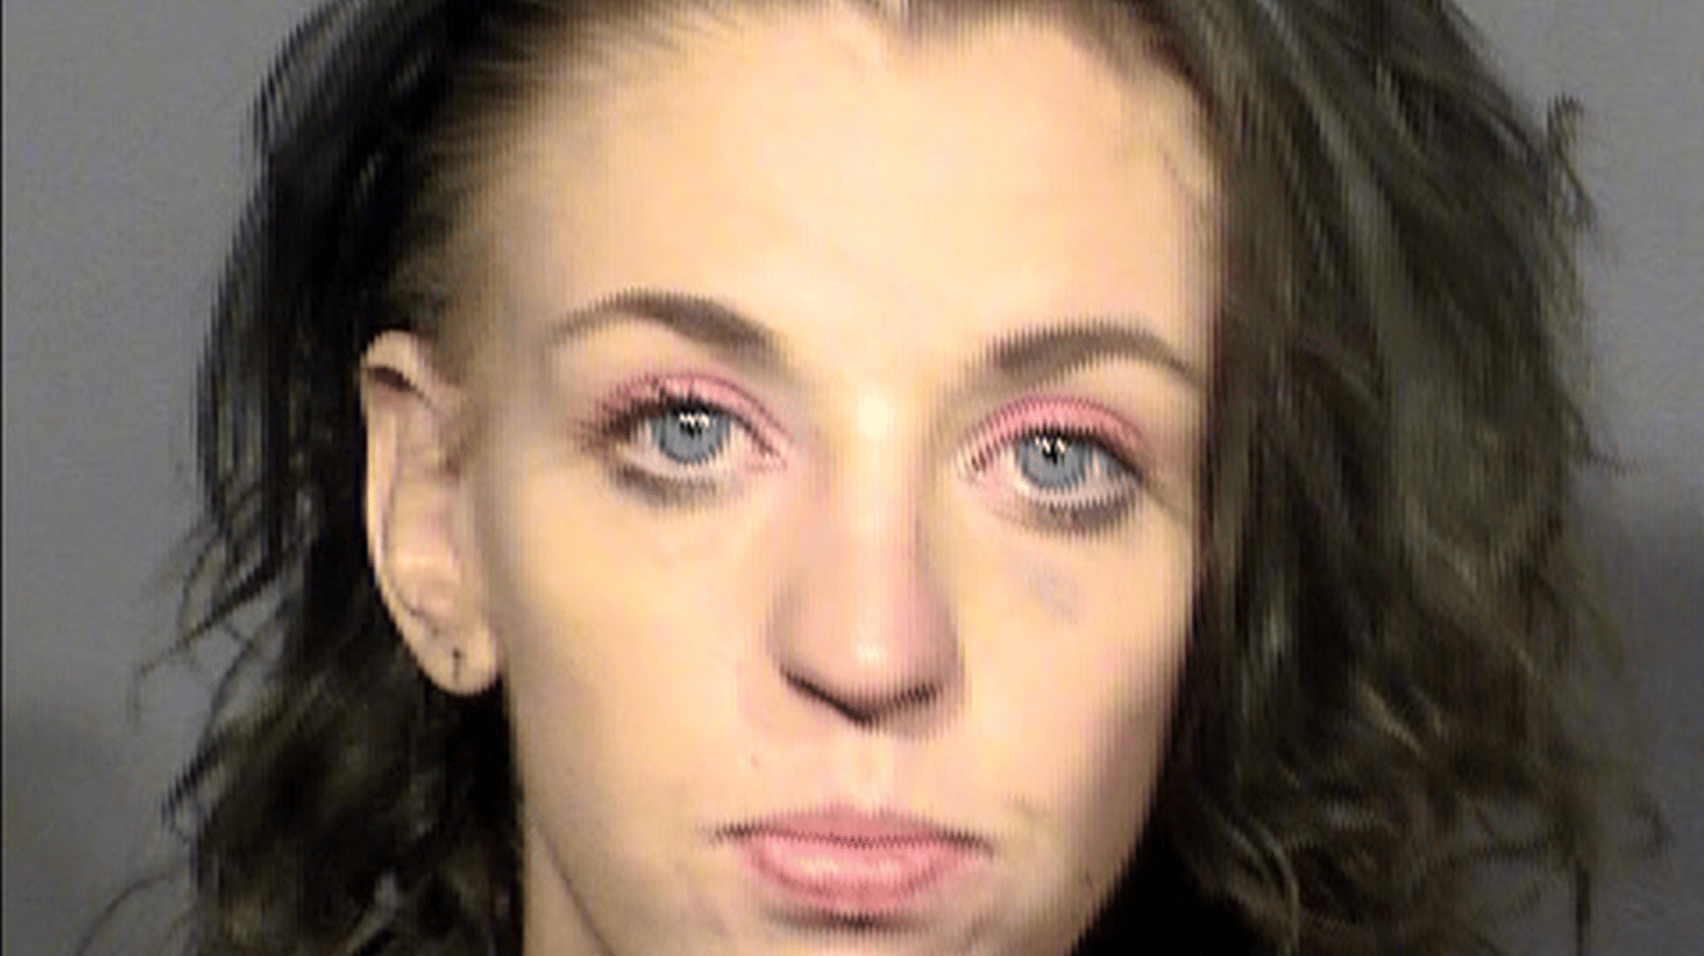 Jenna Lilly Threatened 7-Elven gas station employee with her Ku Klux Klan (KKK) friends and a knife on 1805 E. Tropicana, Las Vegas, Nevada, United States - 15 March 2022